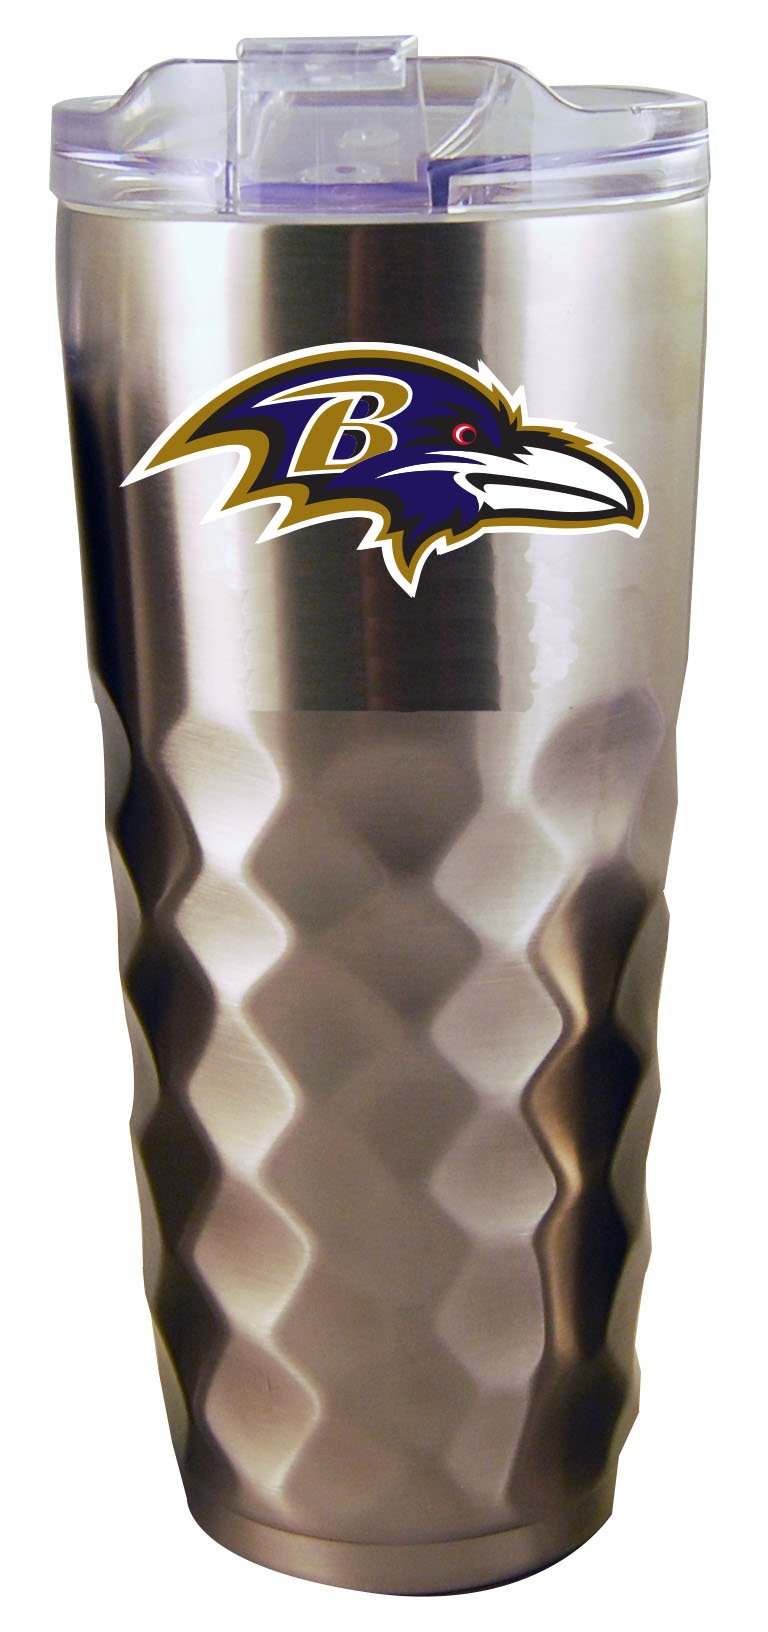 32OZ SS DIAMD TMBLR RAVENS
Baltimore Ravens, BRA, CurrentProduct, Drinkware_category_All, NFL
The Memory Company